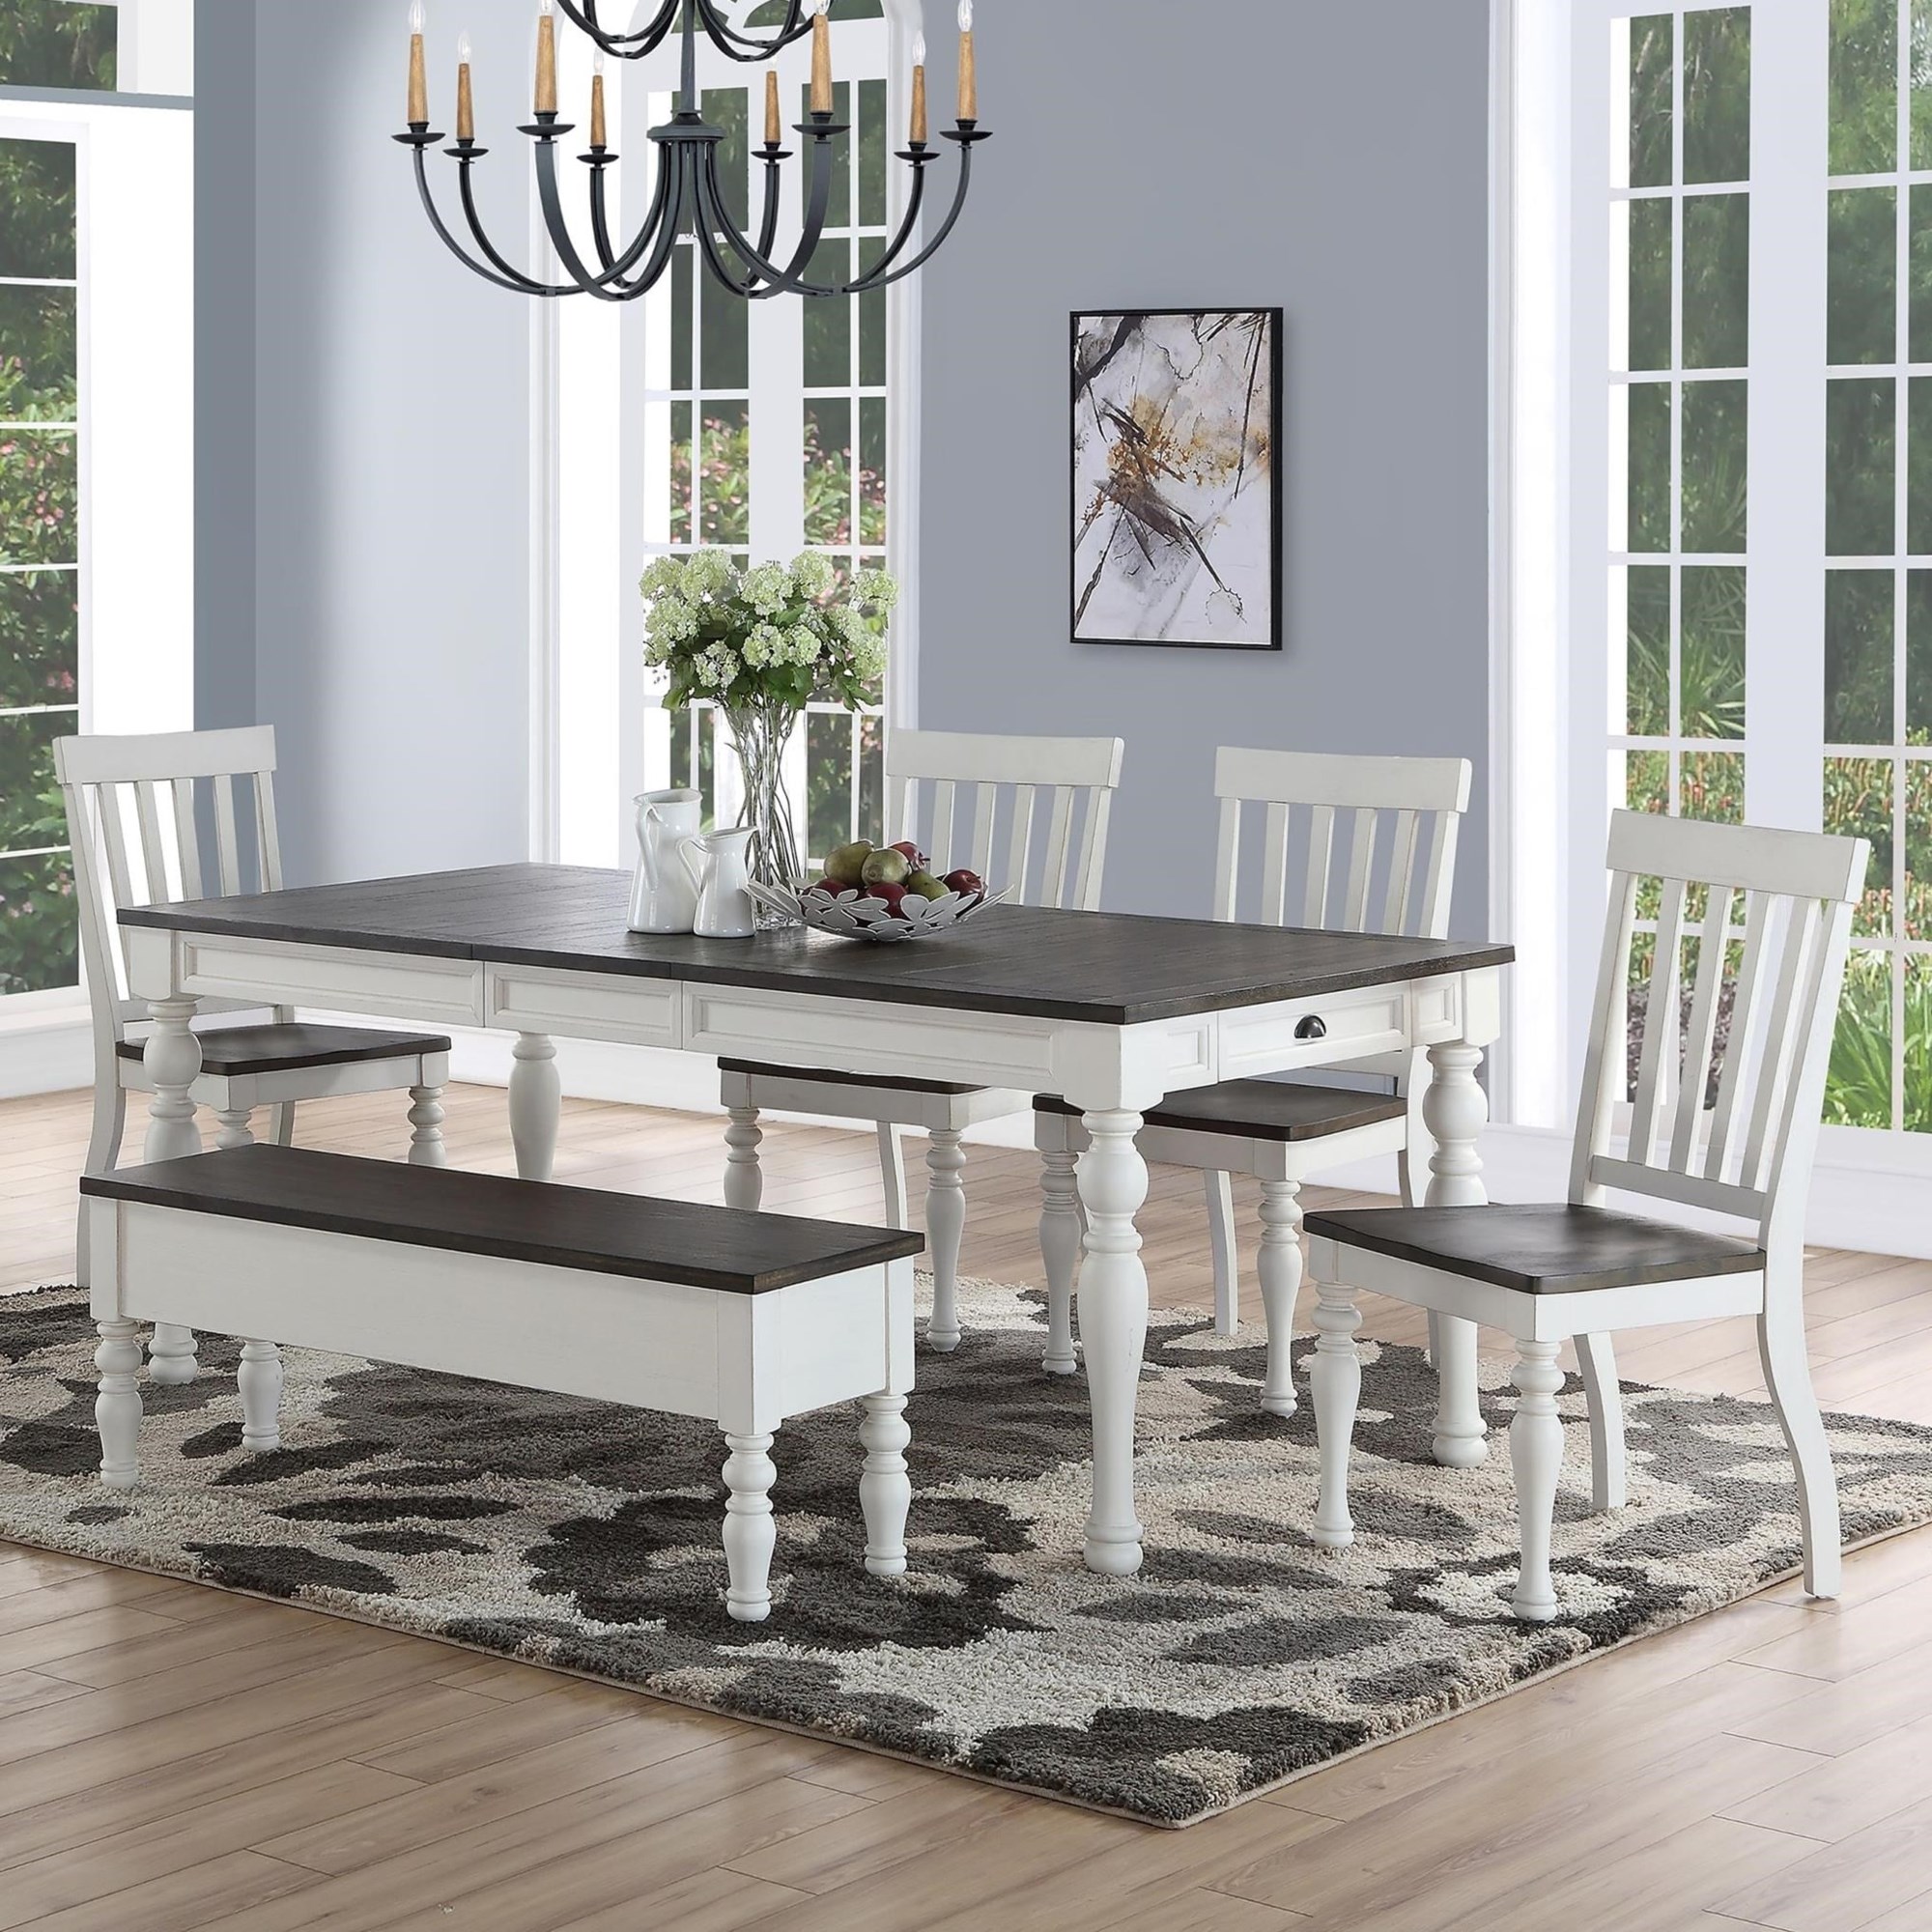 Chista / Furniture / Large Tables / Suar Dining Tables